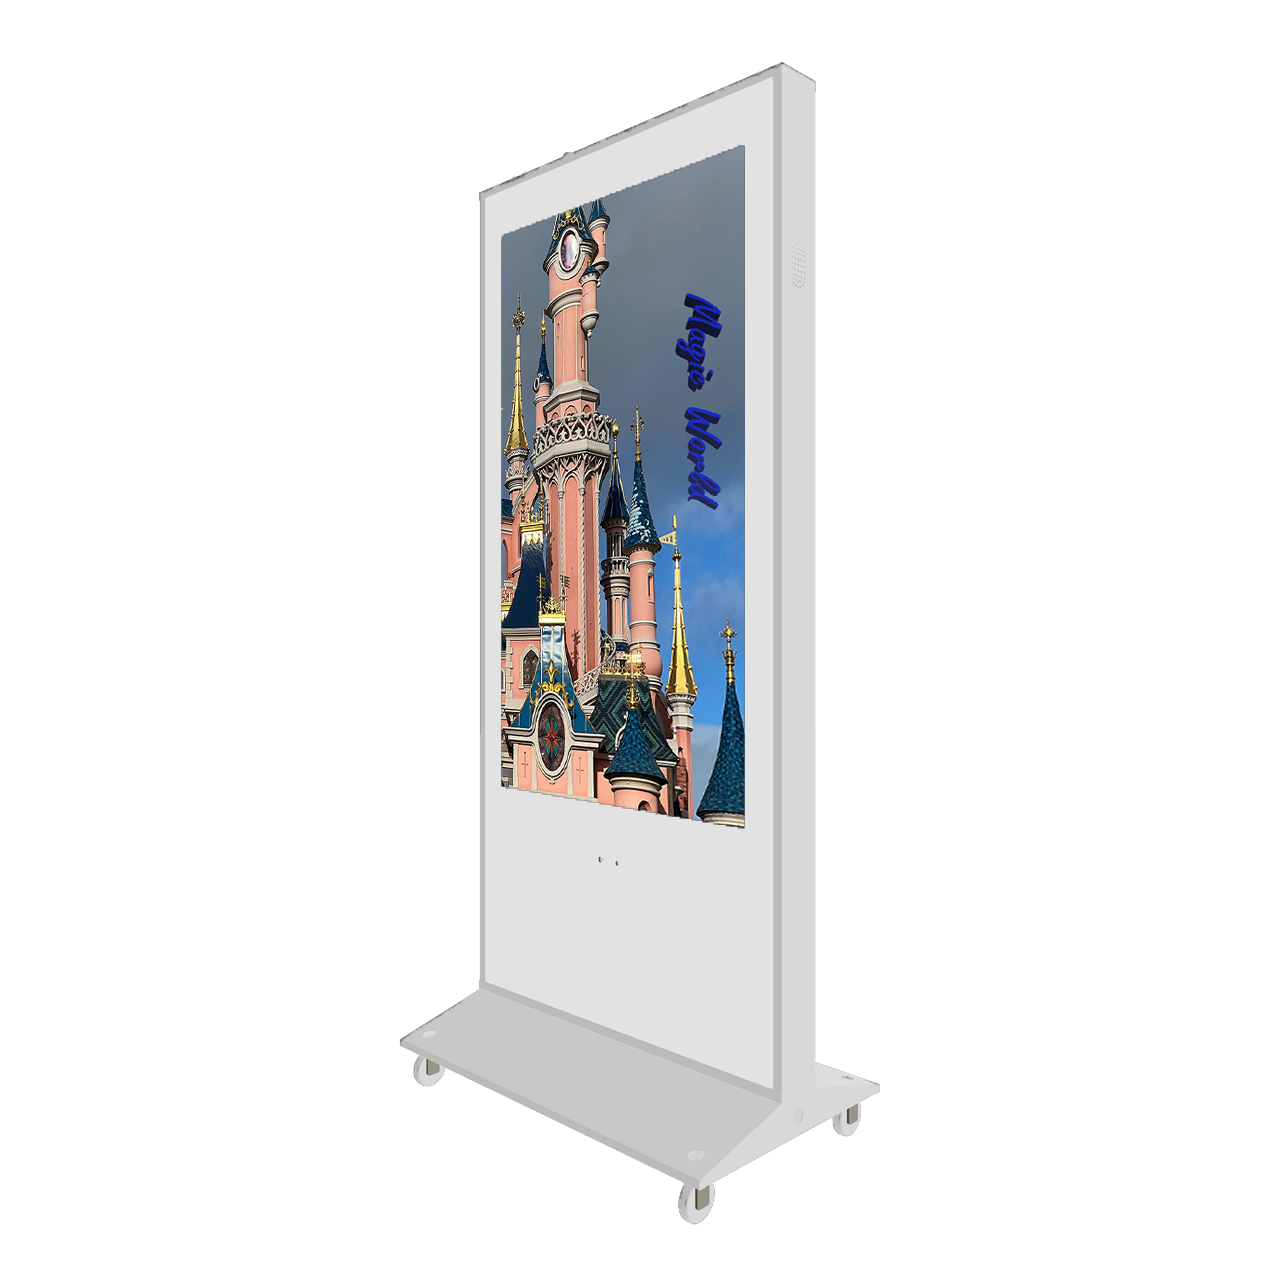 49-inch white outdoor digital signage